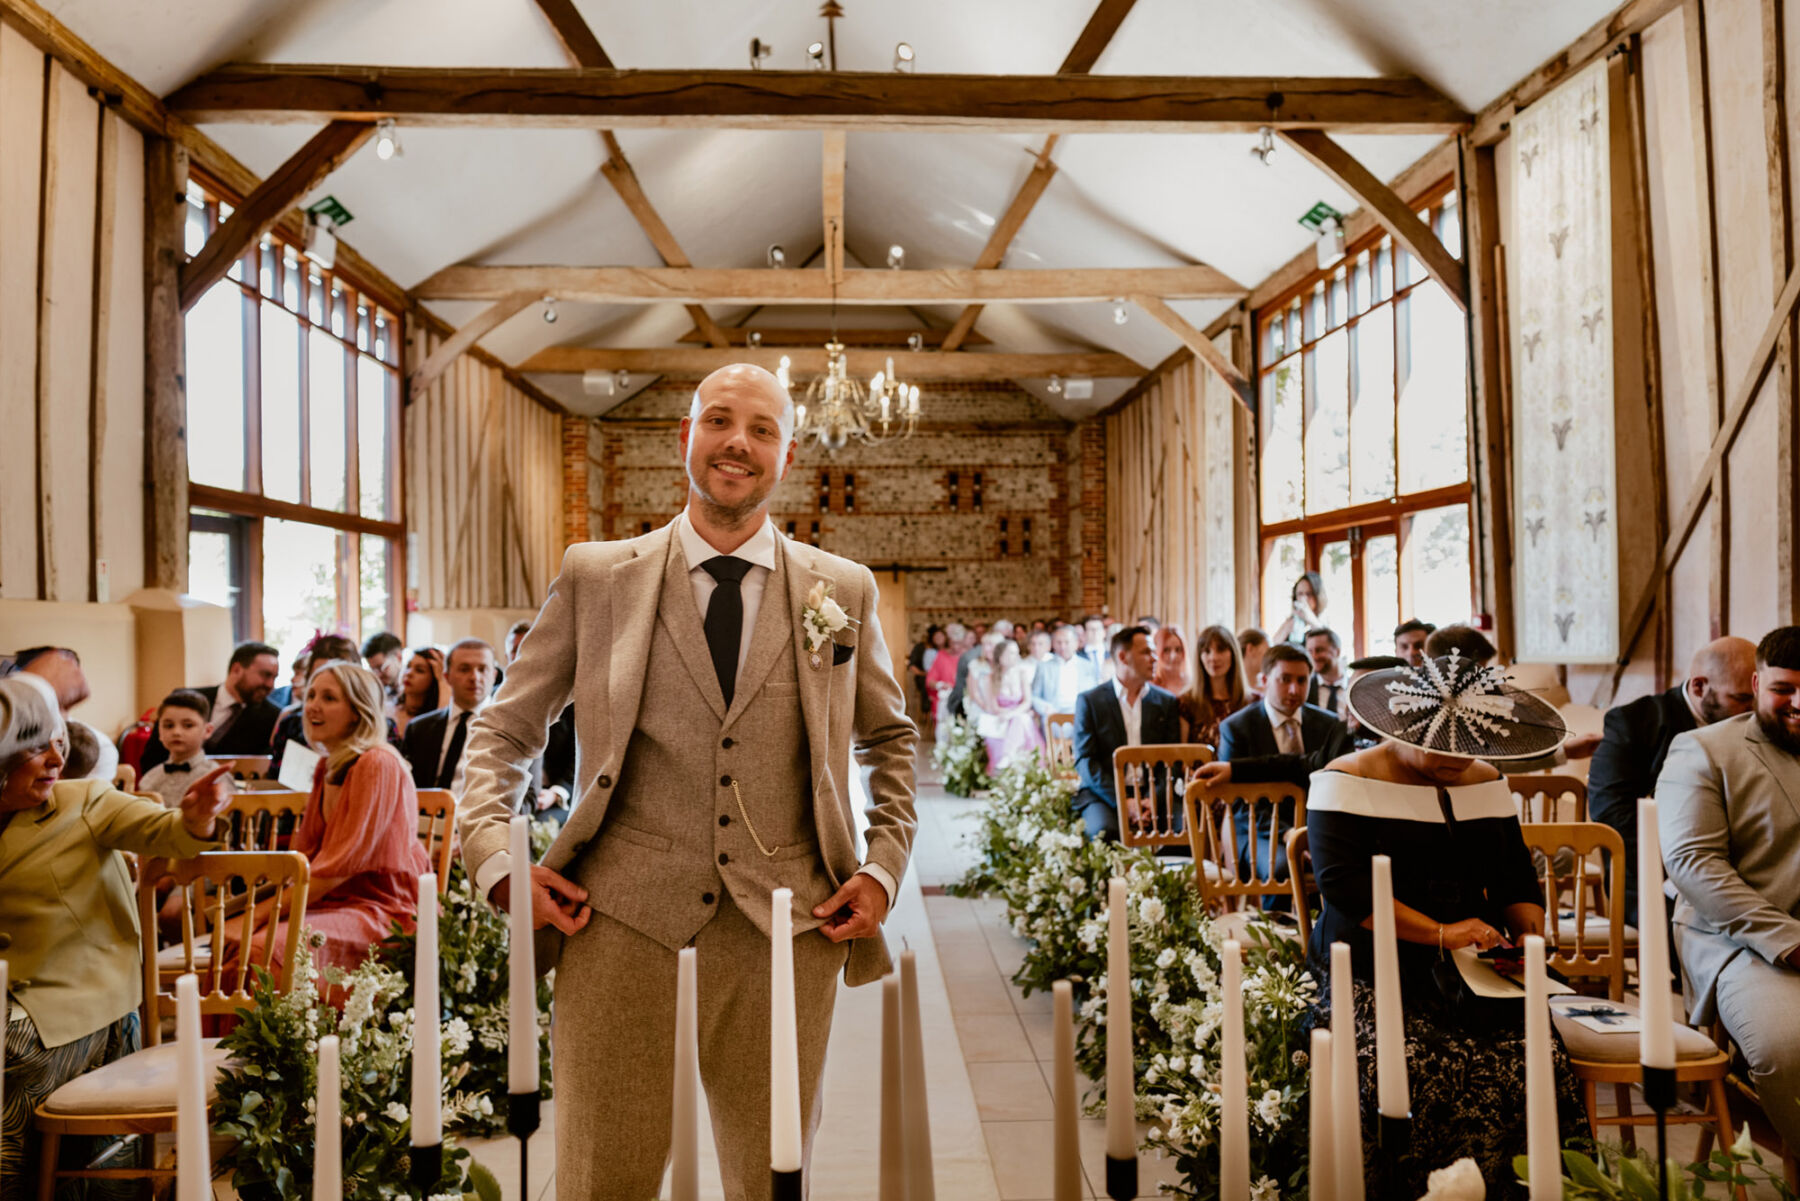 Groom in pale suit from Next. Upwaltham Barns wedding ceremony.